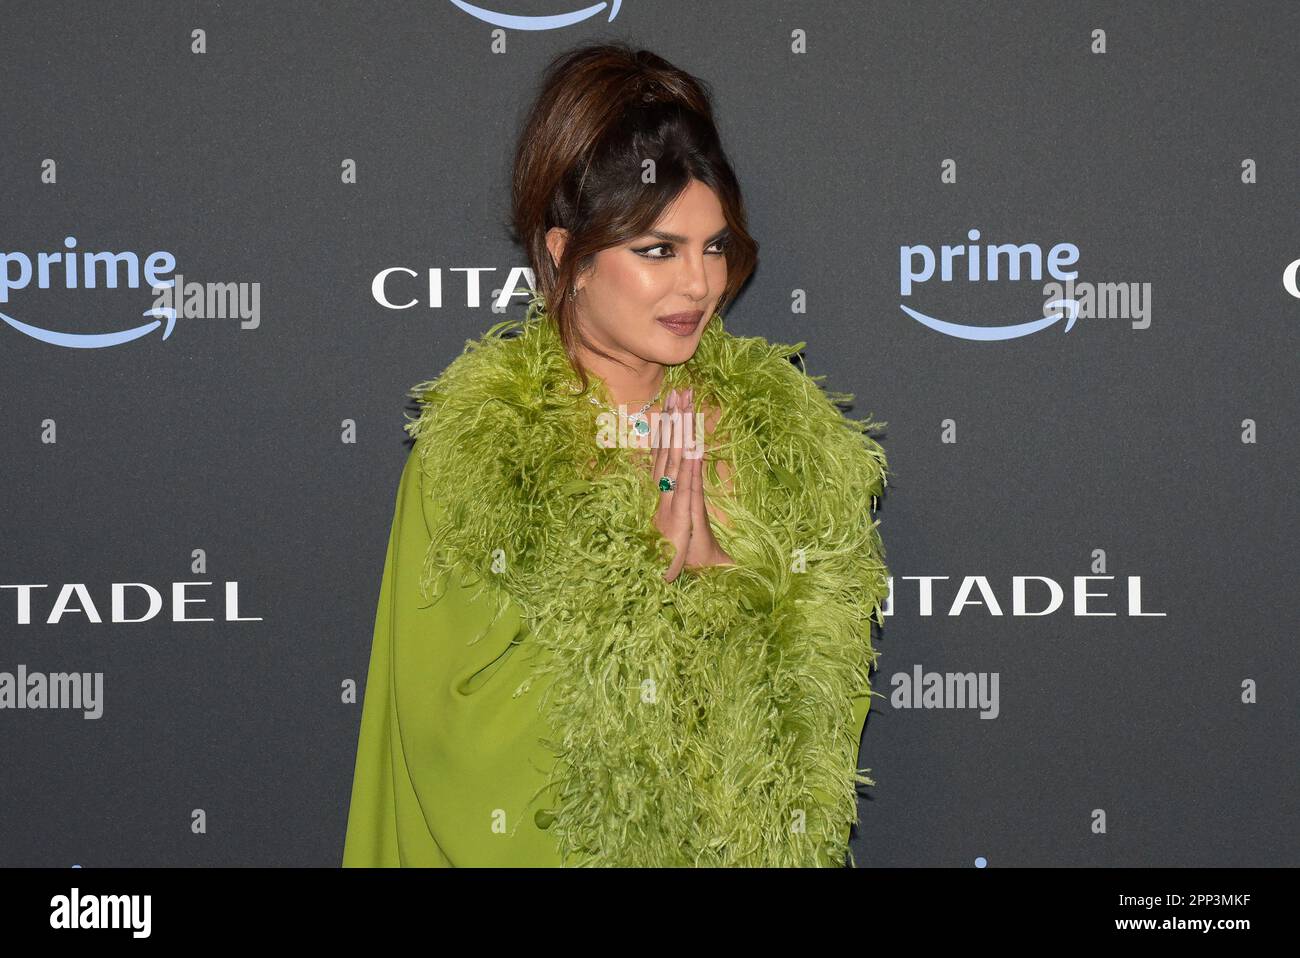 Rome, Italy. 21st Apr, 2023. Priyanka Chopra Jonas attends the Citadel tv series premiere in Rome. (Photo by Vincenzo Nuzzolese/SOPA Images/Sipa USA) Credit: Sipa USA/Alamy Live News Stock Photo